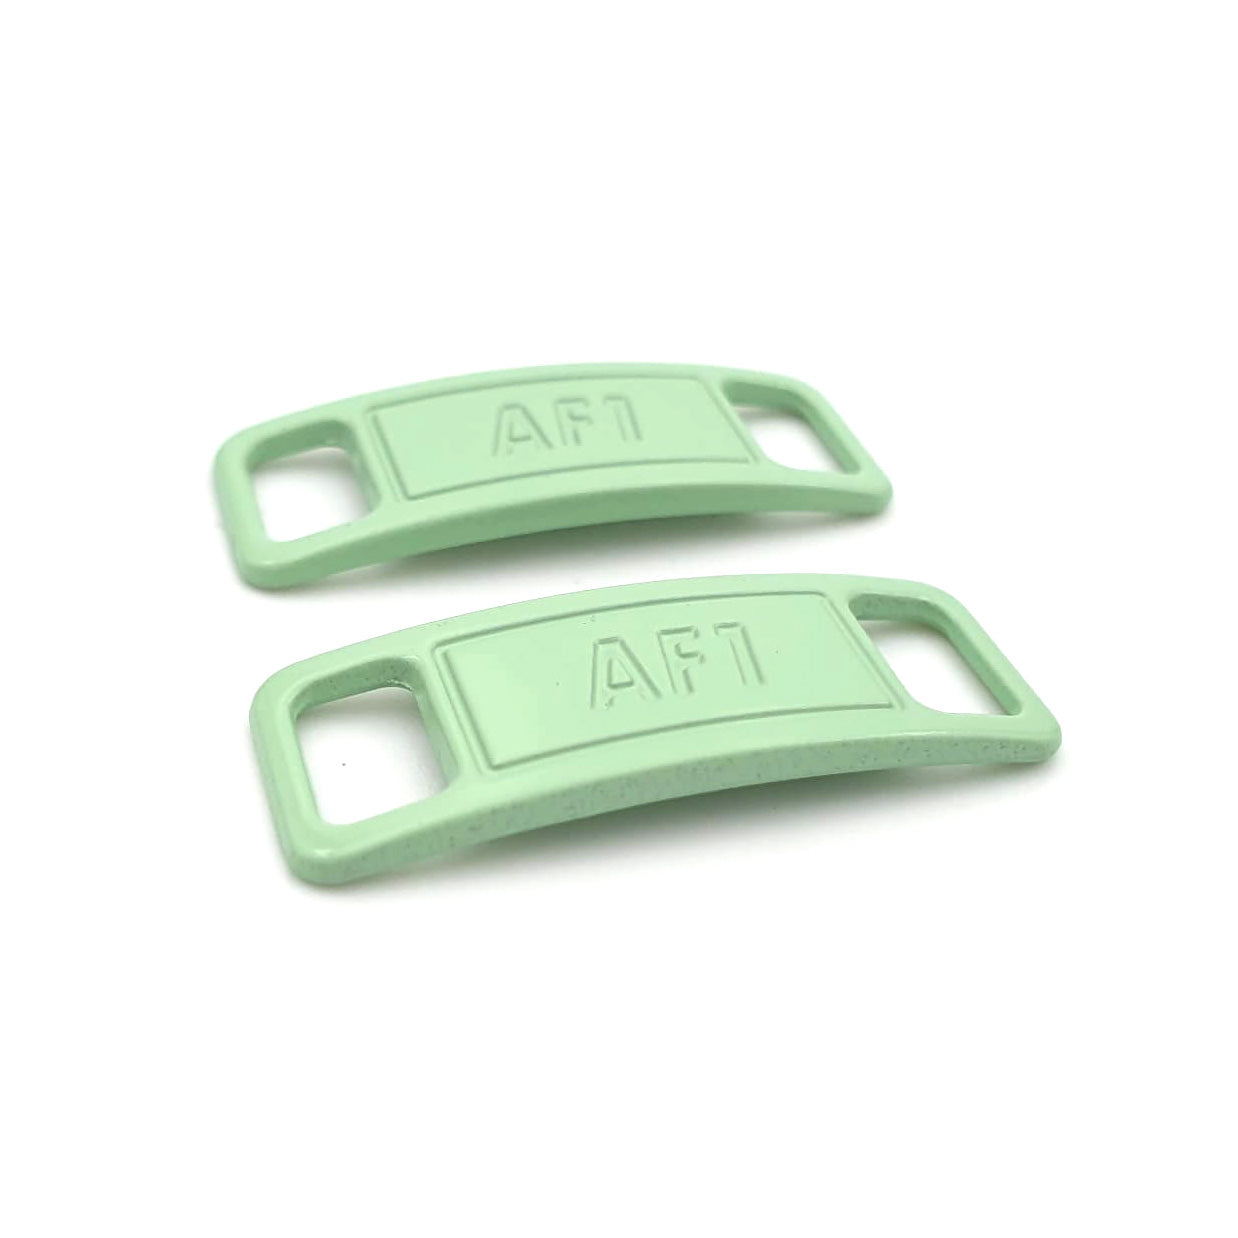 Lace Tags Af1, 1 pair, pastel green